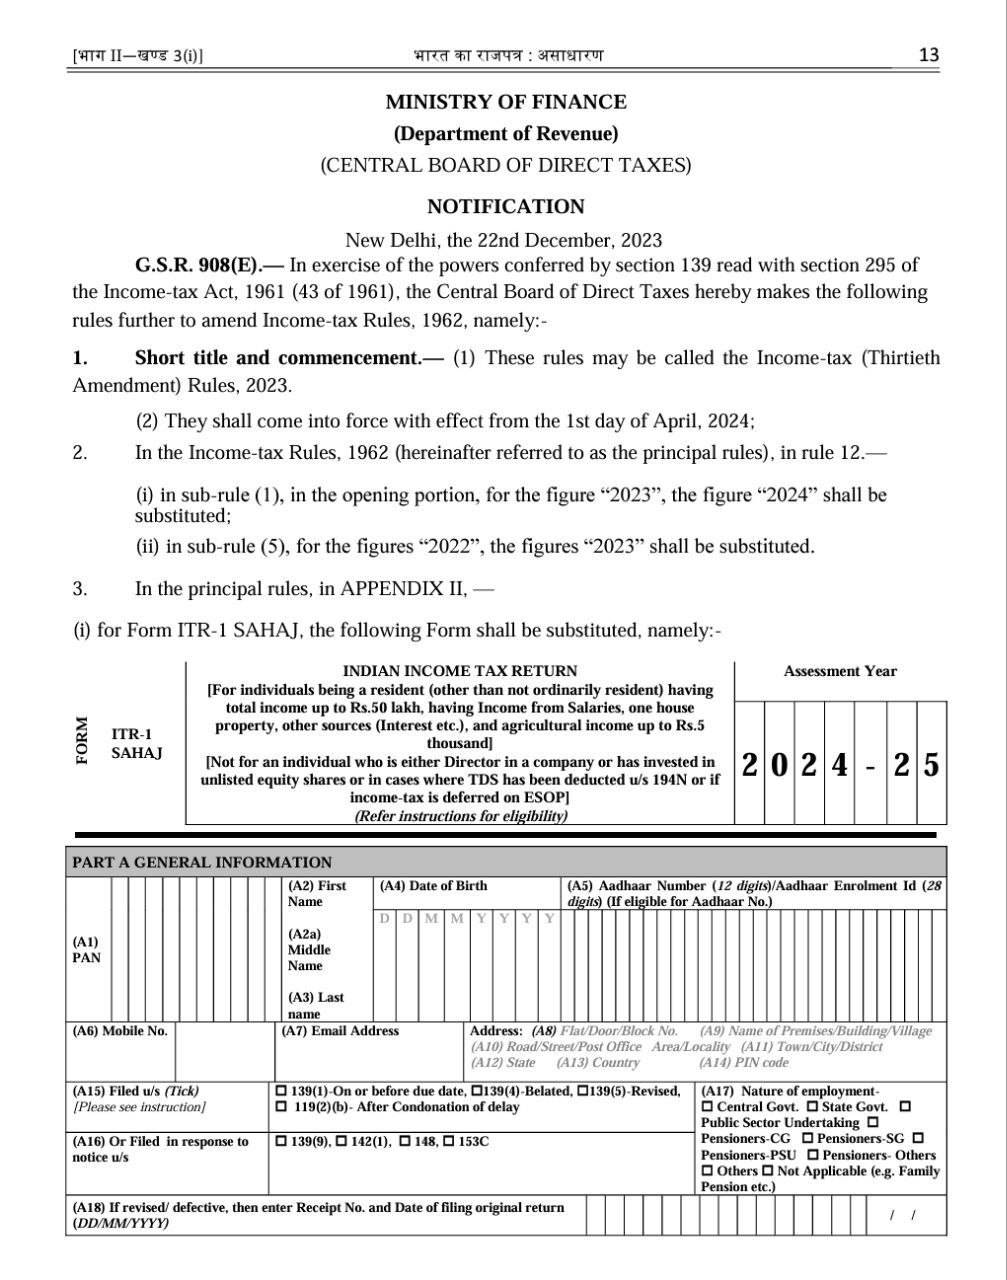 Income Tax Return Form ITR 1 and ITR 4 notified for AY 2024-25 -